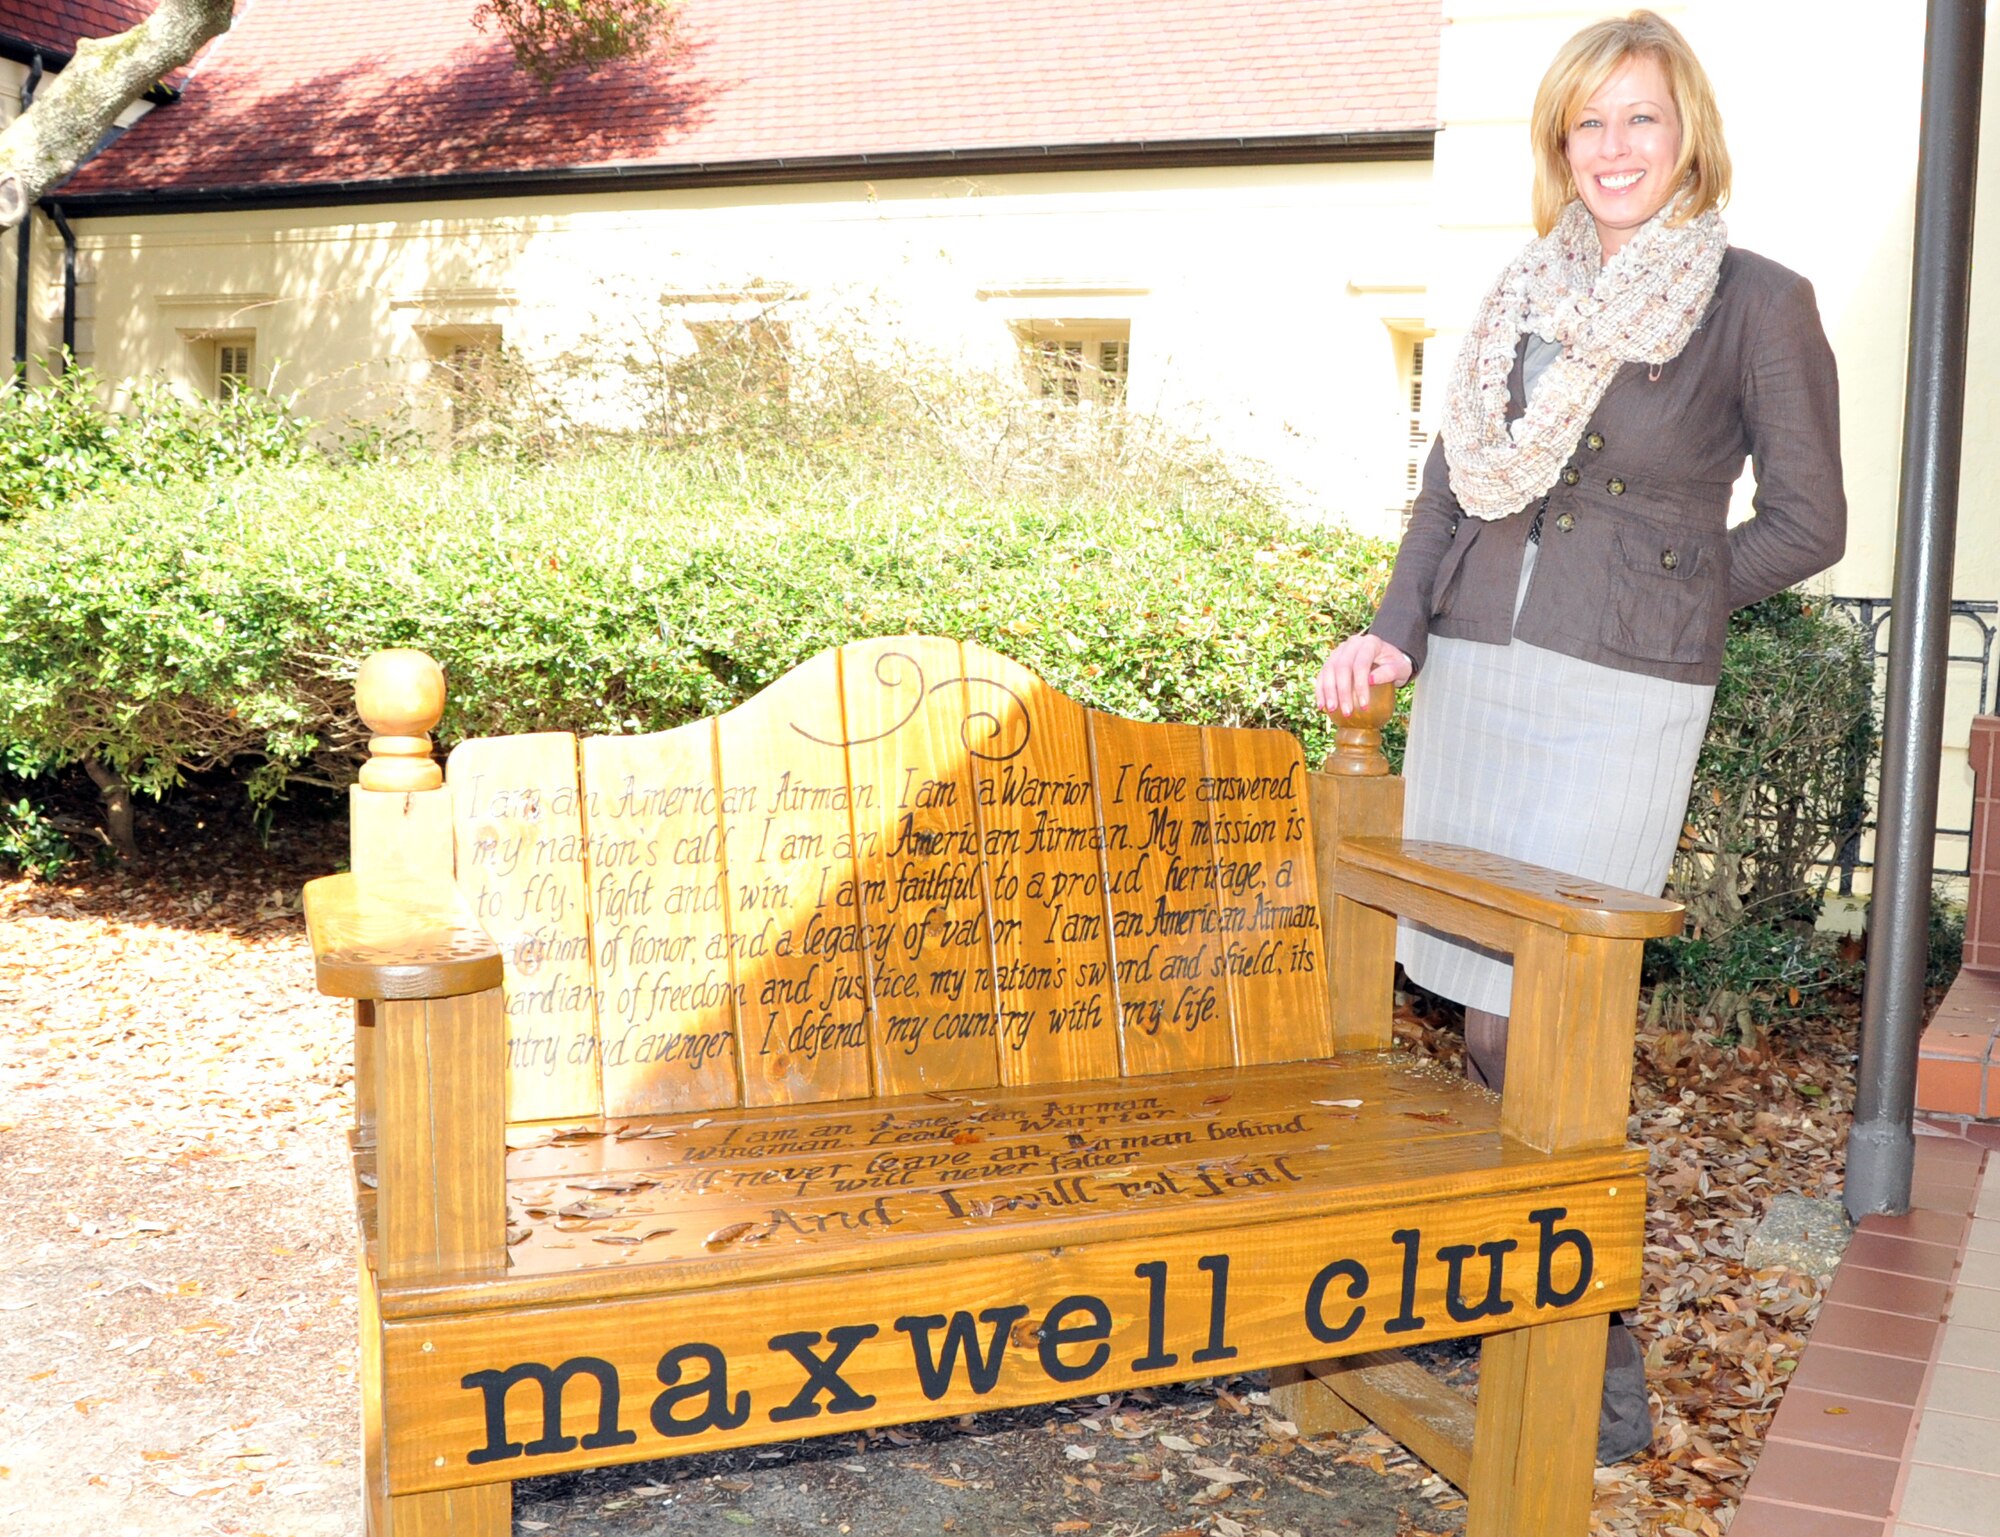 Among their many projects, Rachel Napier, Maxwell Club manager and her
friend Pam Wickham from Columbus Air Force Base, Miss., built the bench that
sits outside the entrance to the Maxwell Club, complete with the
hand-painted Airman's Creed. (U.S. Air Force photo by Phil Berube)